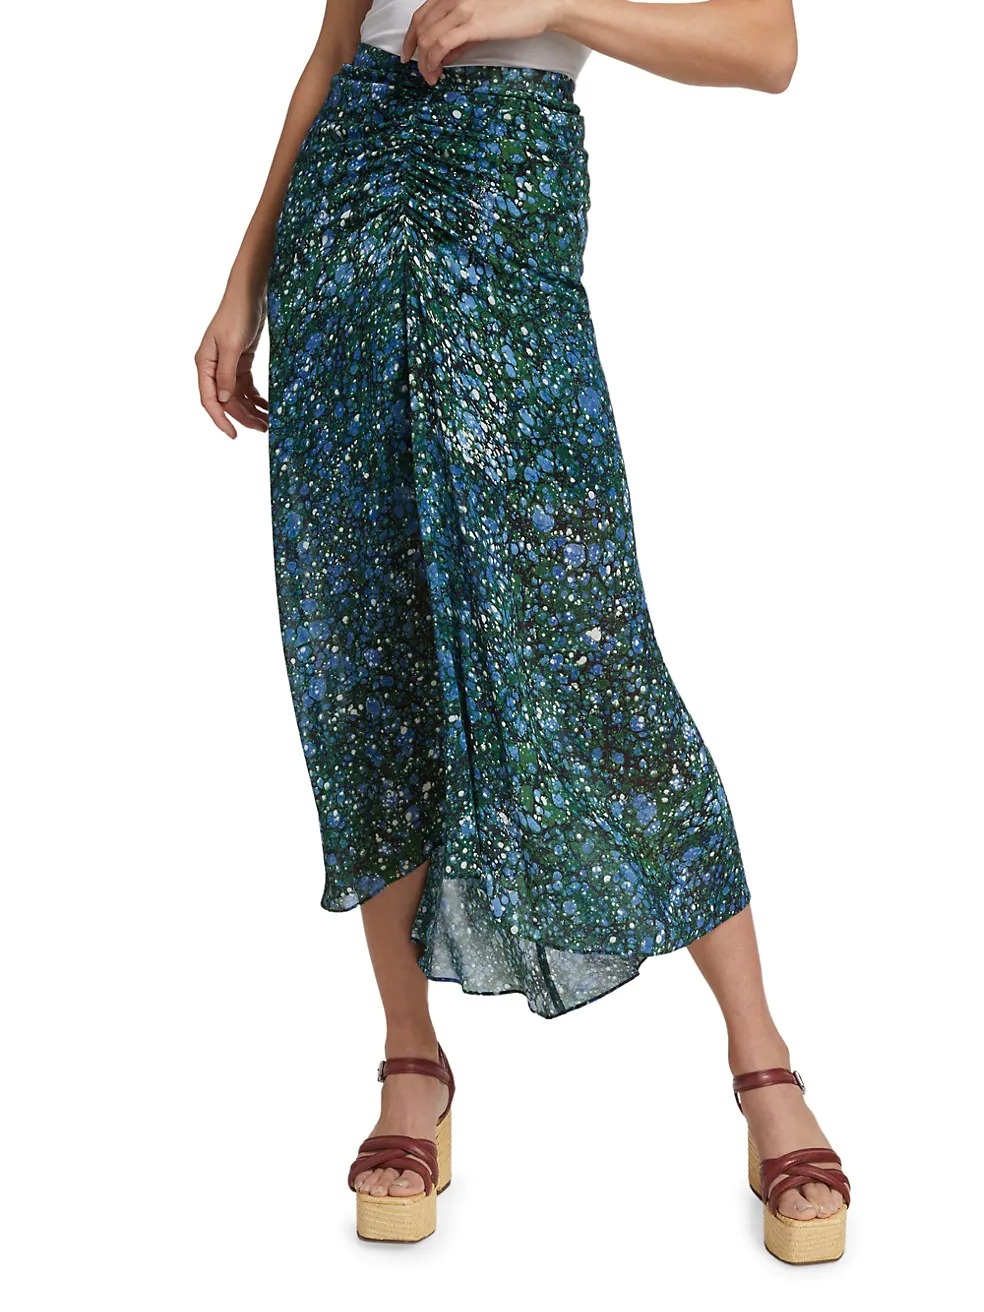 Sale on Veronica Beard Limani Bubble-Print Ruched Skirt